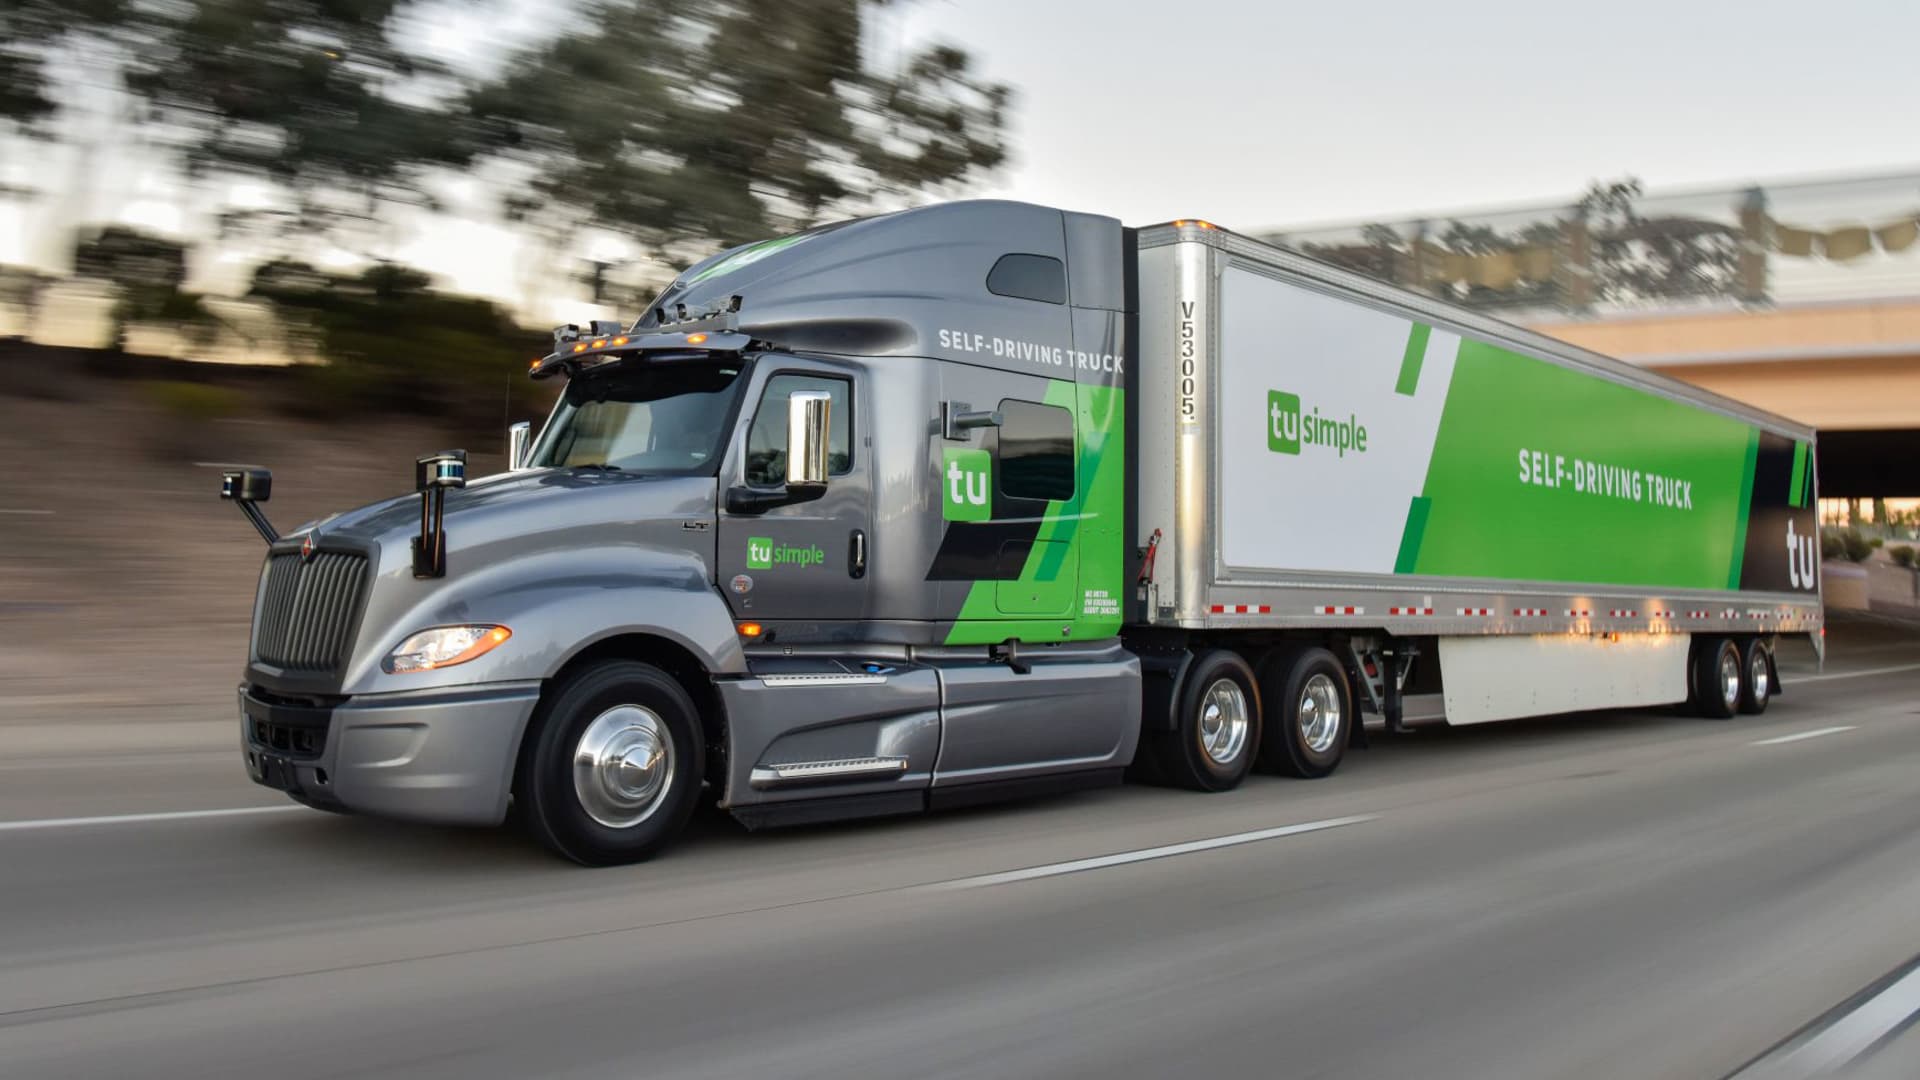 TuSimple, partly owned by UPS, makes self-driving trucks, a technology that may be among the innovations to help lower longer-run inflation in the transport sector.